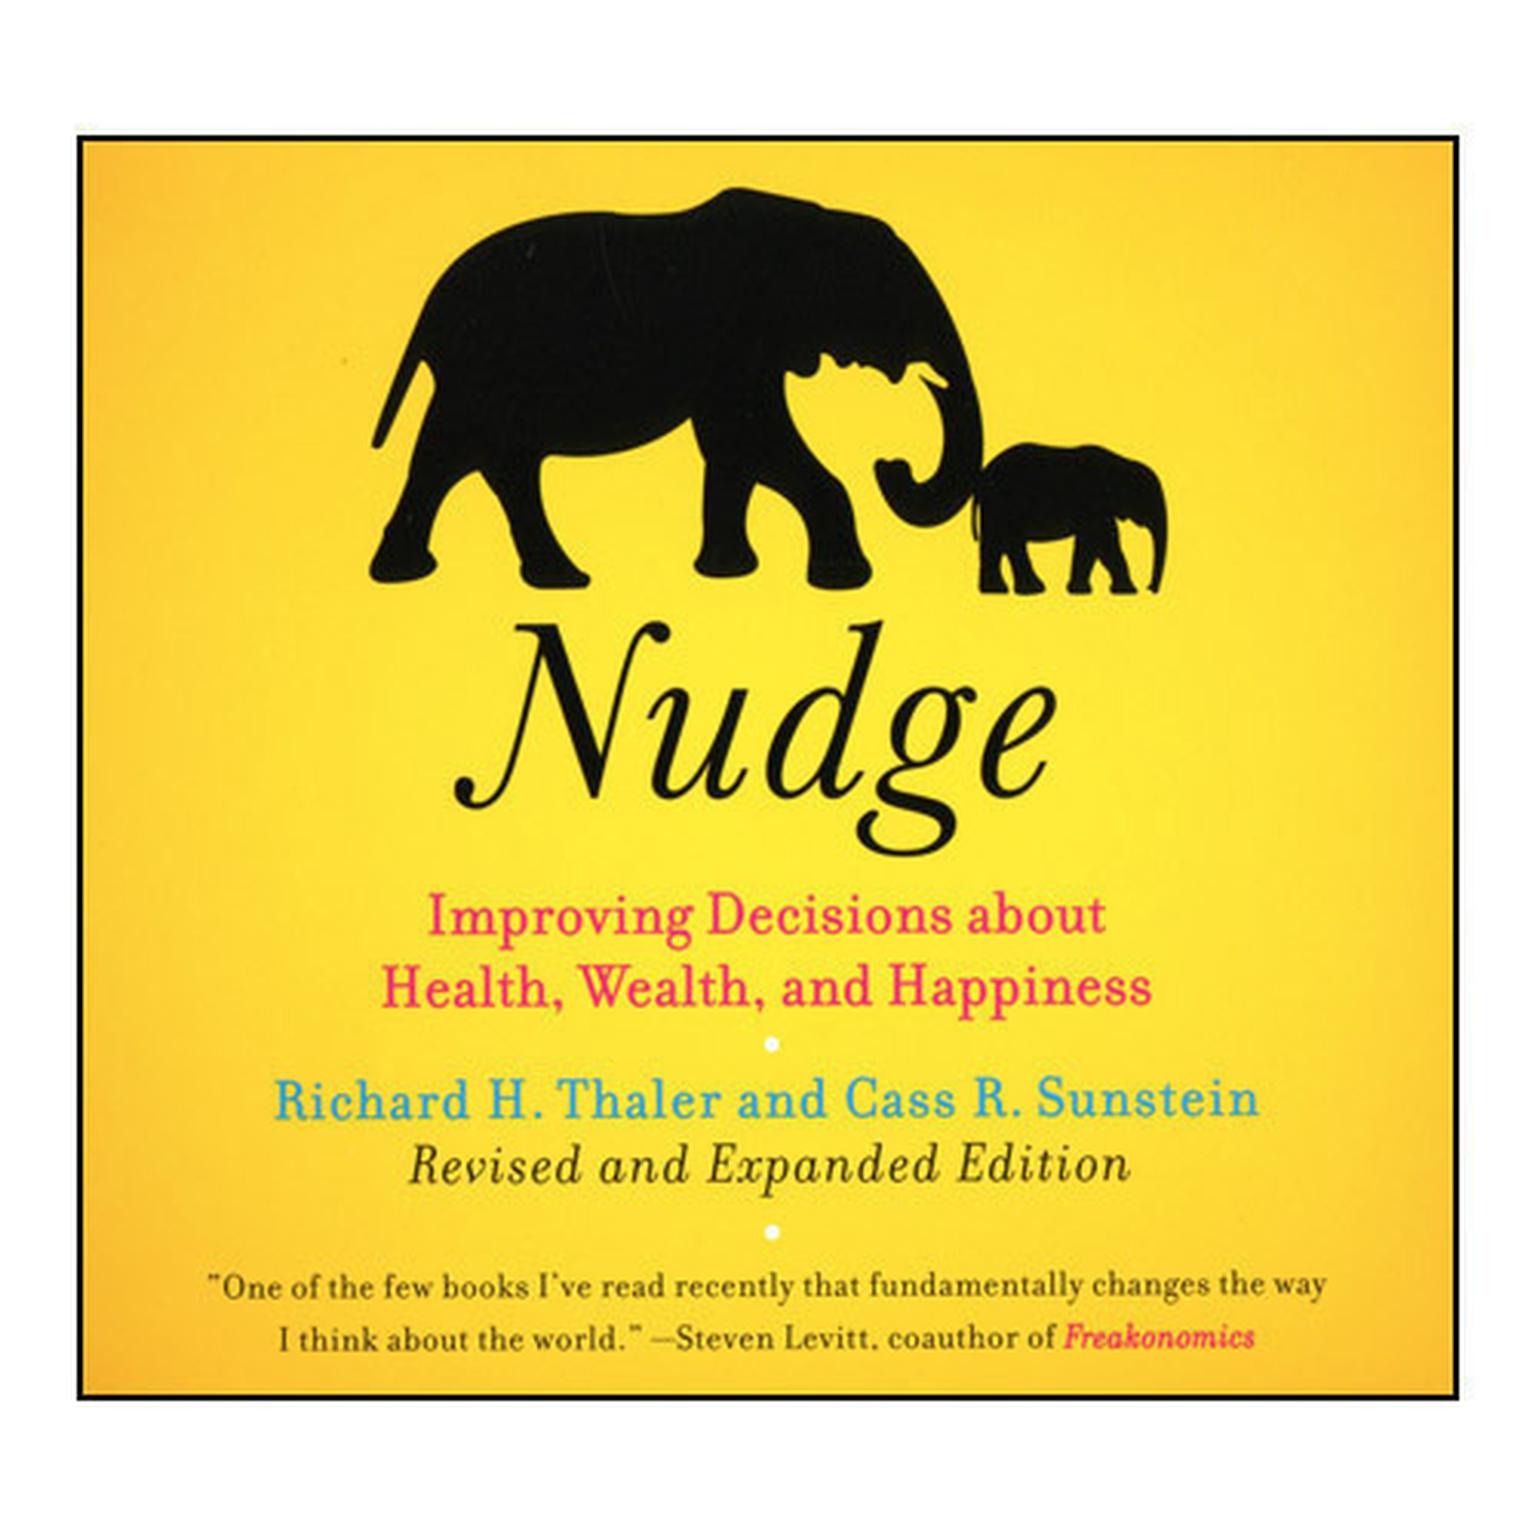 Nudge (Revised Edition): Improving Decisions About Health, Wealth, and Happiness Audiobook, by Richard H. Thaler